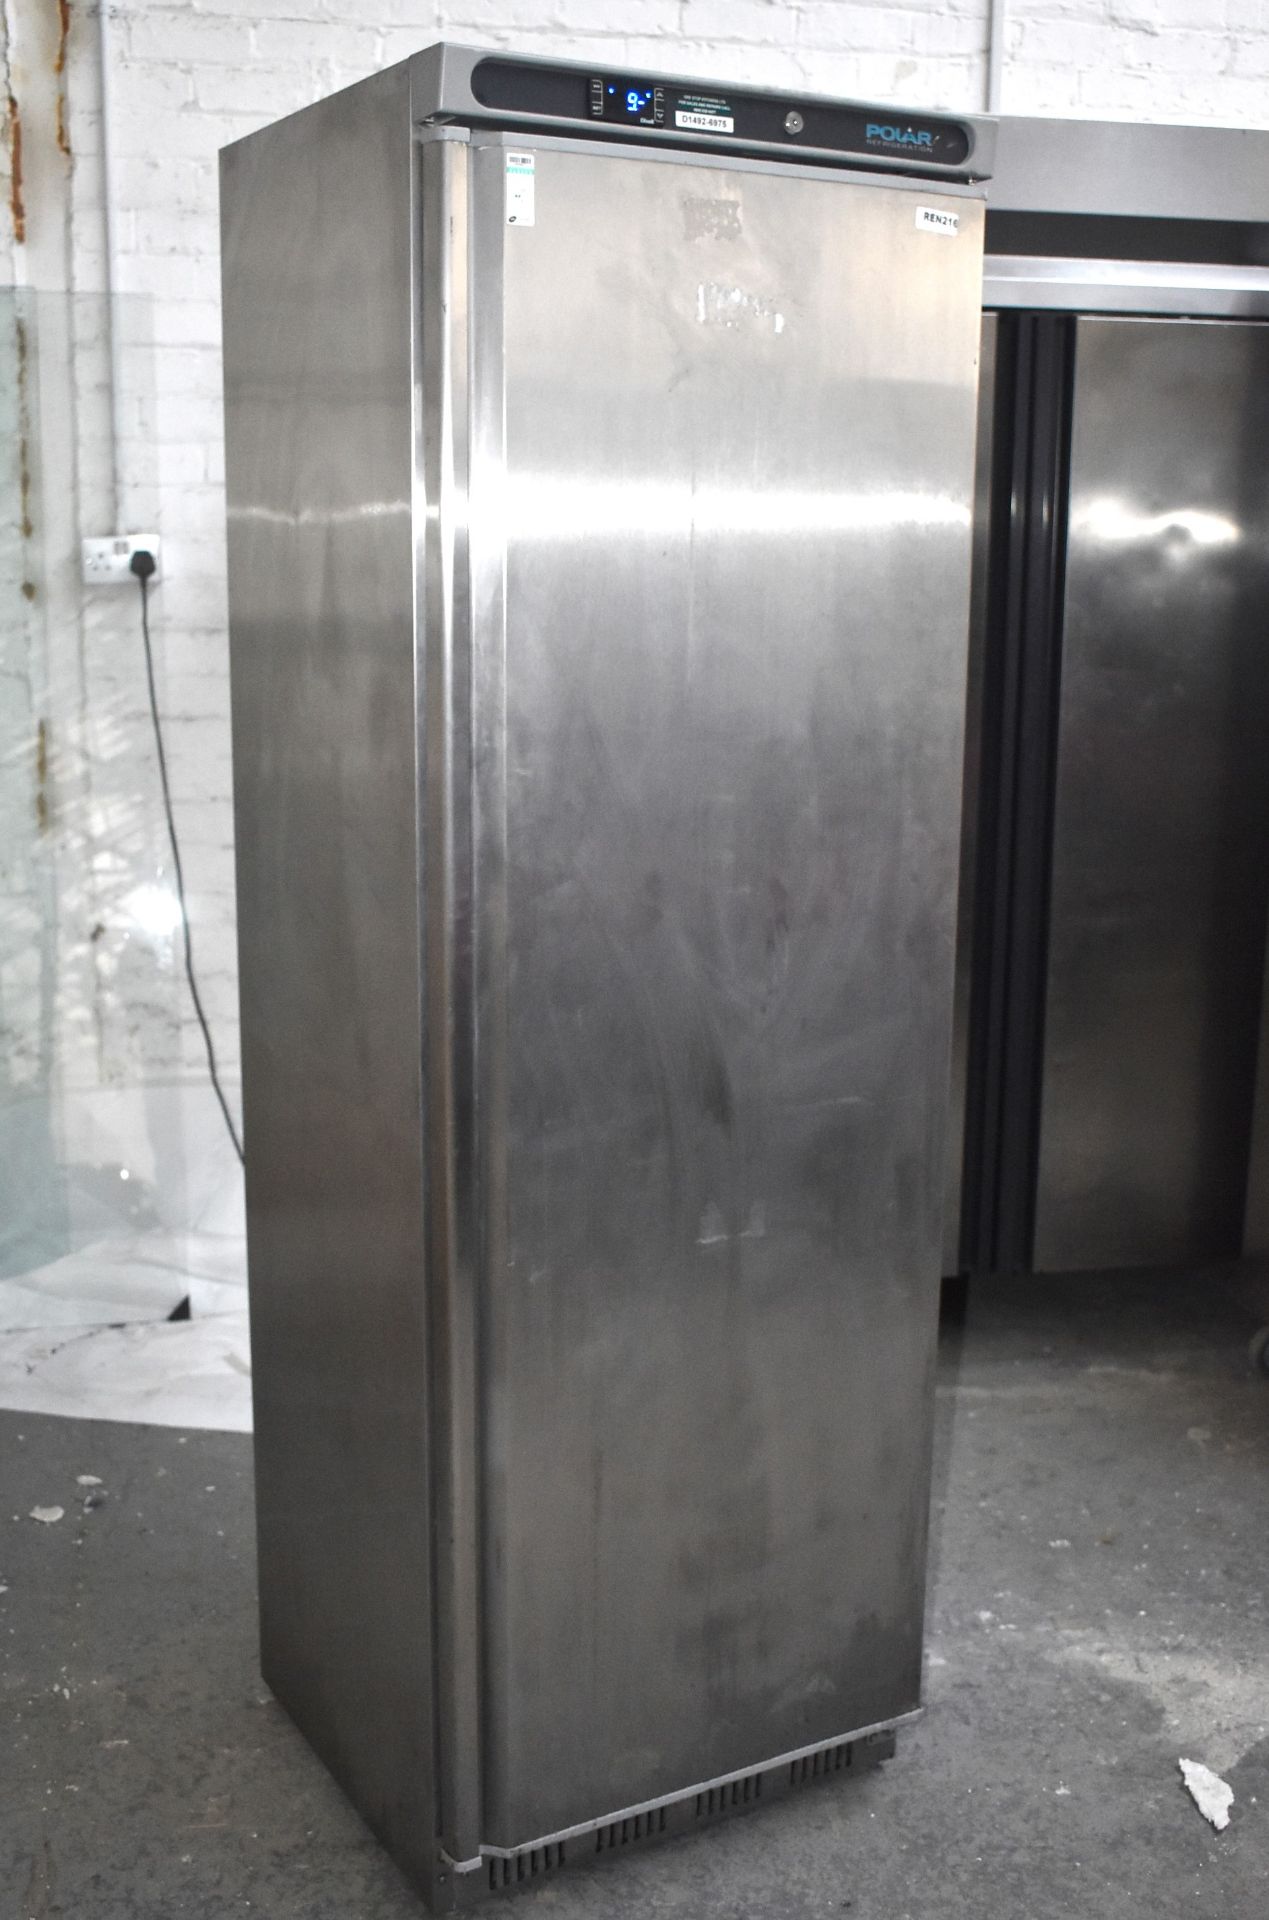 1 x Polar C-Series Commercial Upright Freezer With Stainless Steel Finish - 365Ltr Capacity